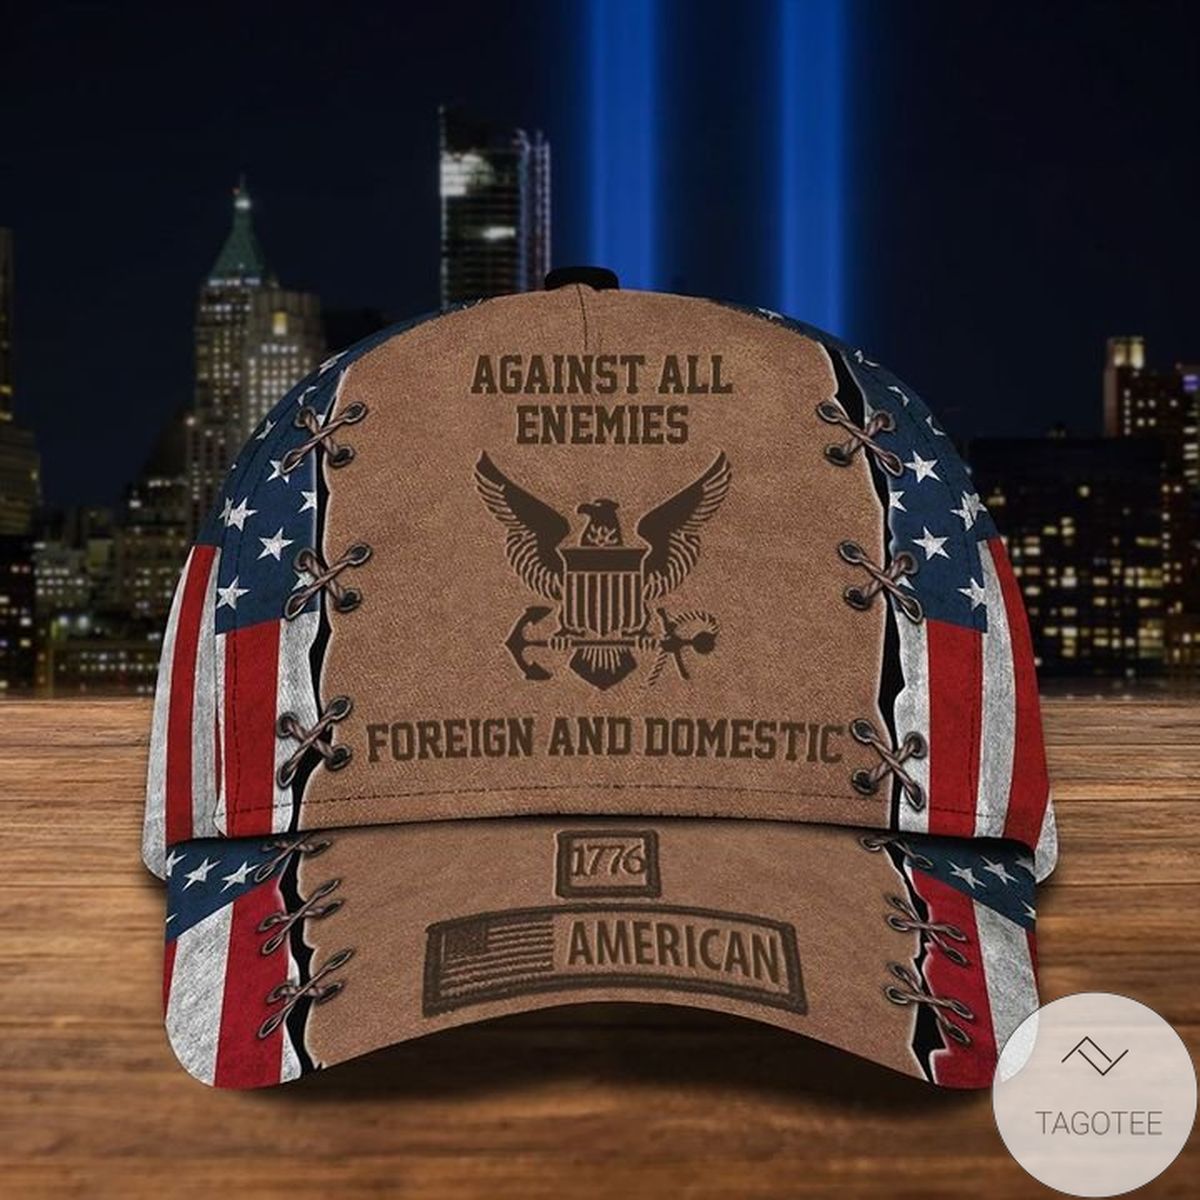 US Navy Cap USA 1776 American Hat Against All Enemies Foreign & Domestic USN Navy Gift For Dad